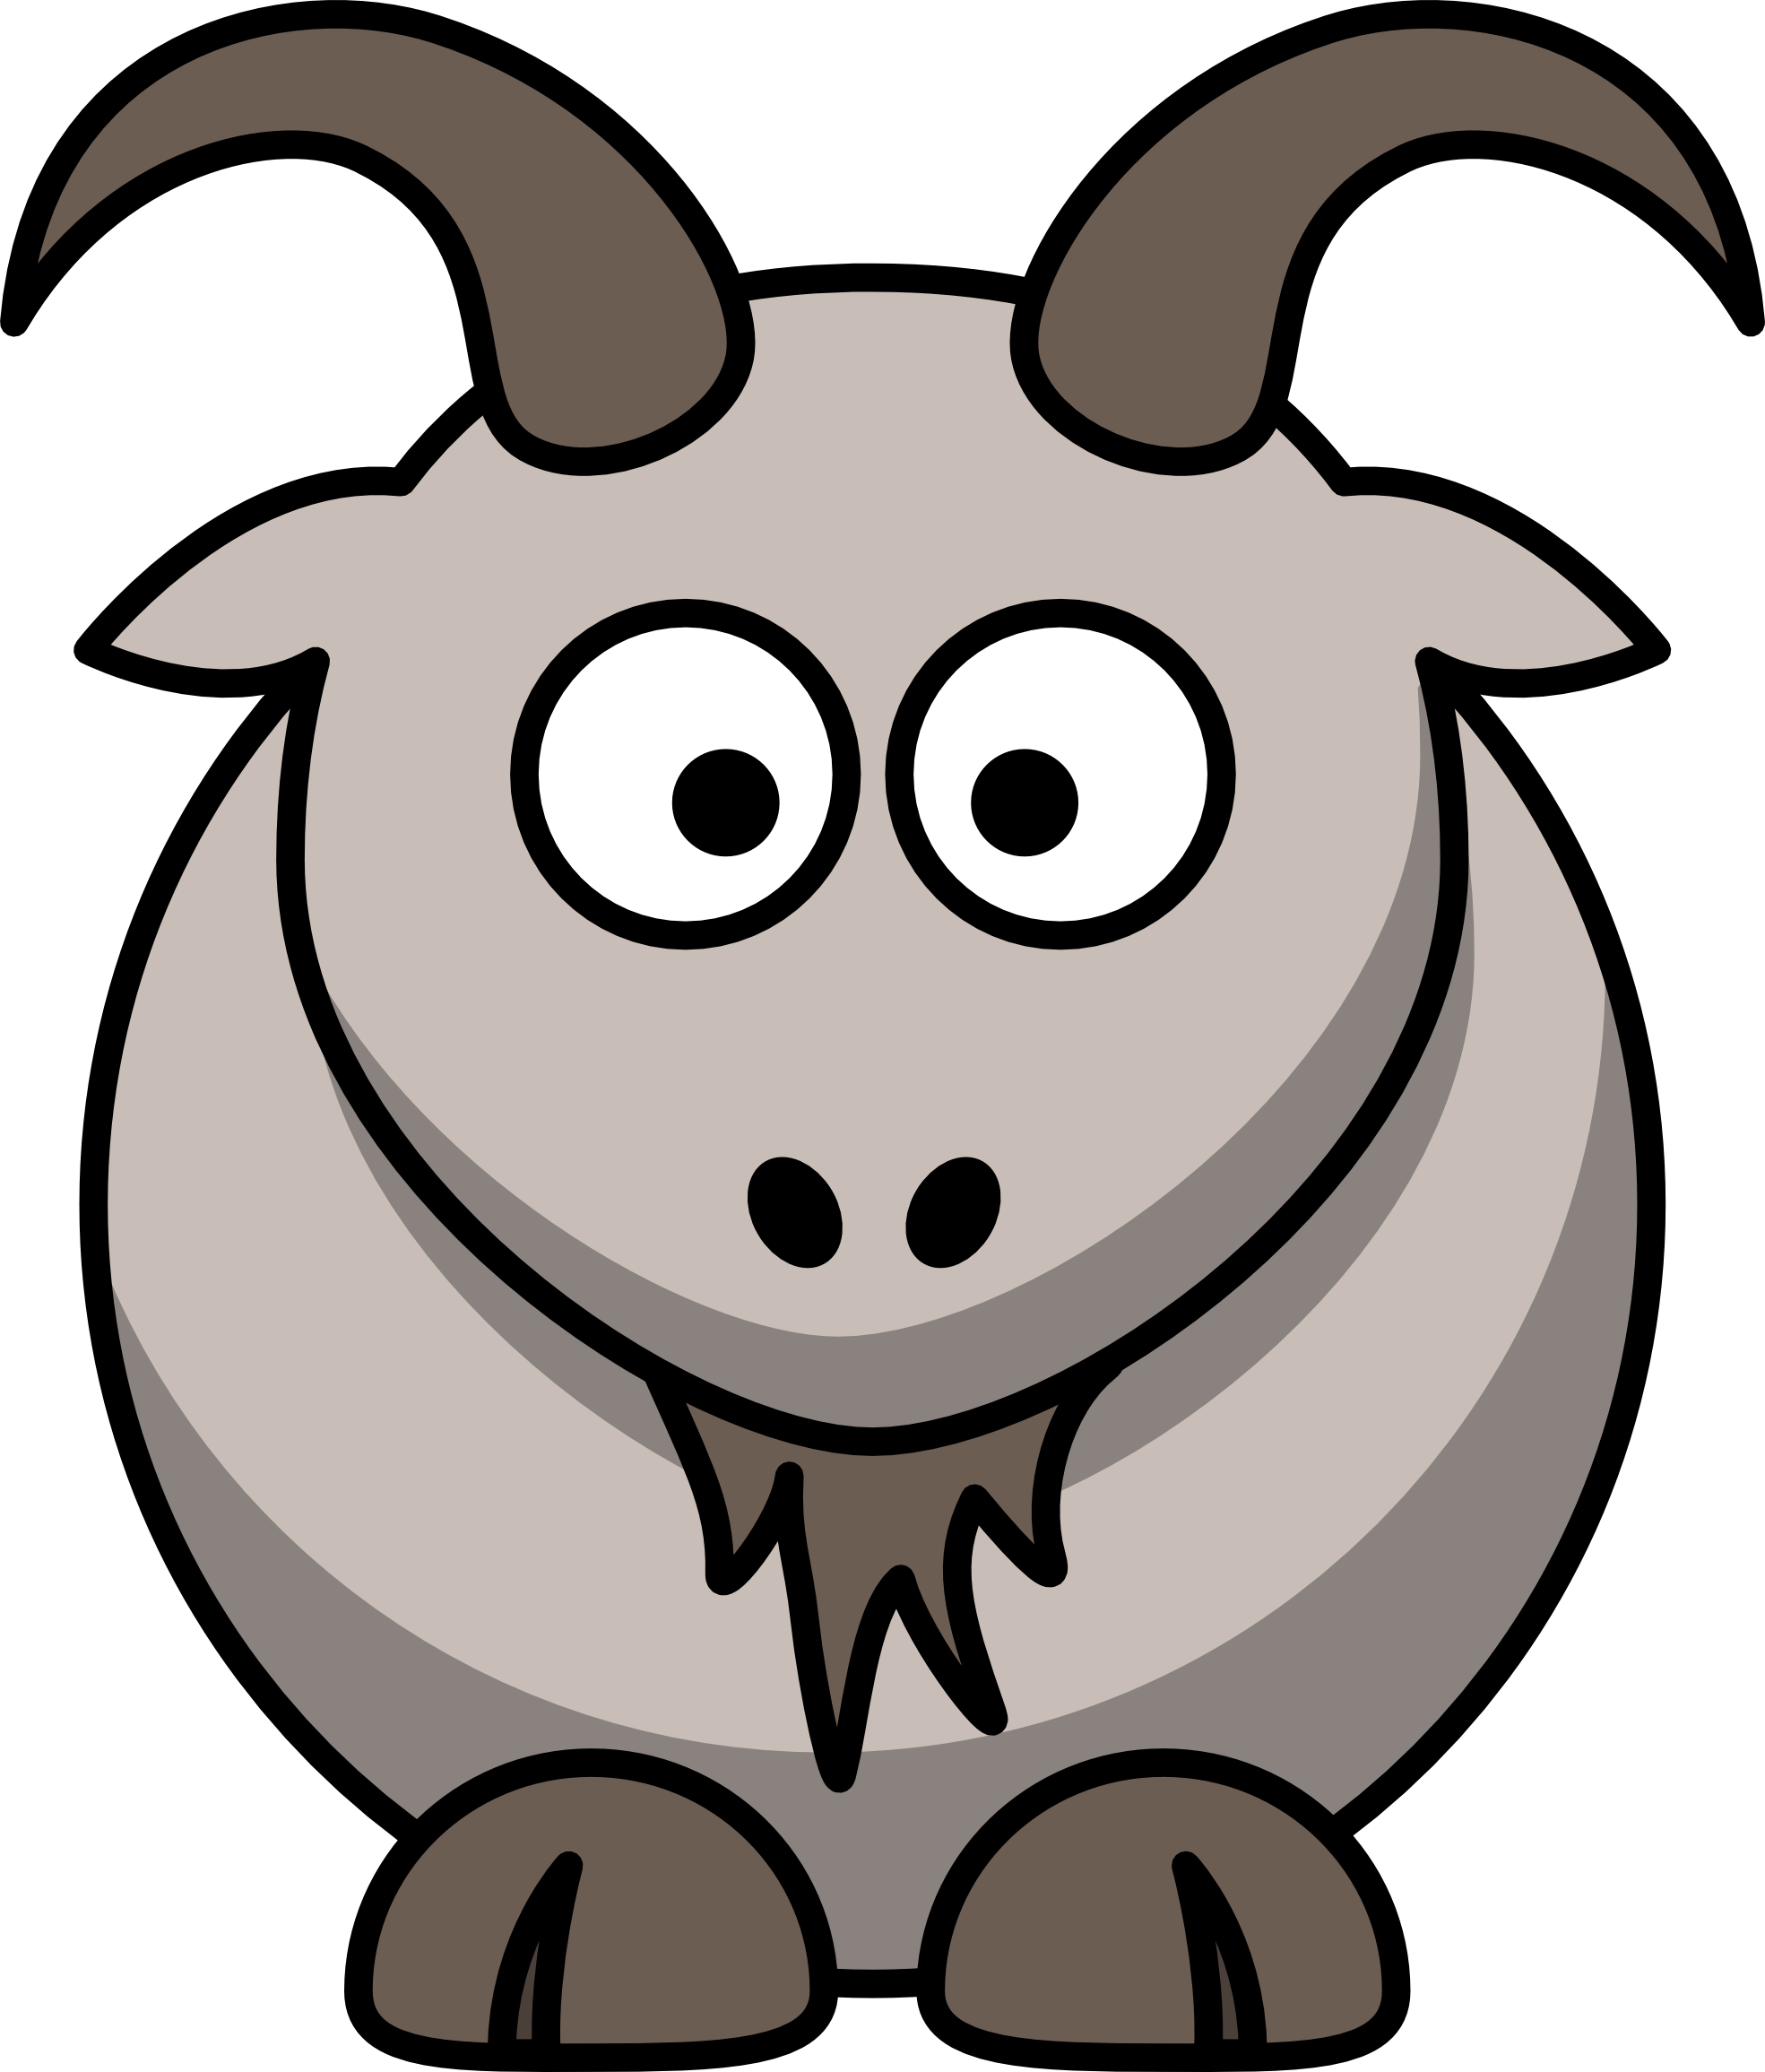 Goat Clipart Black And White | Clipart Panda - Free Clipart Images